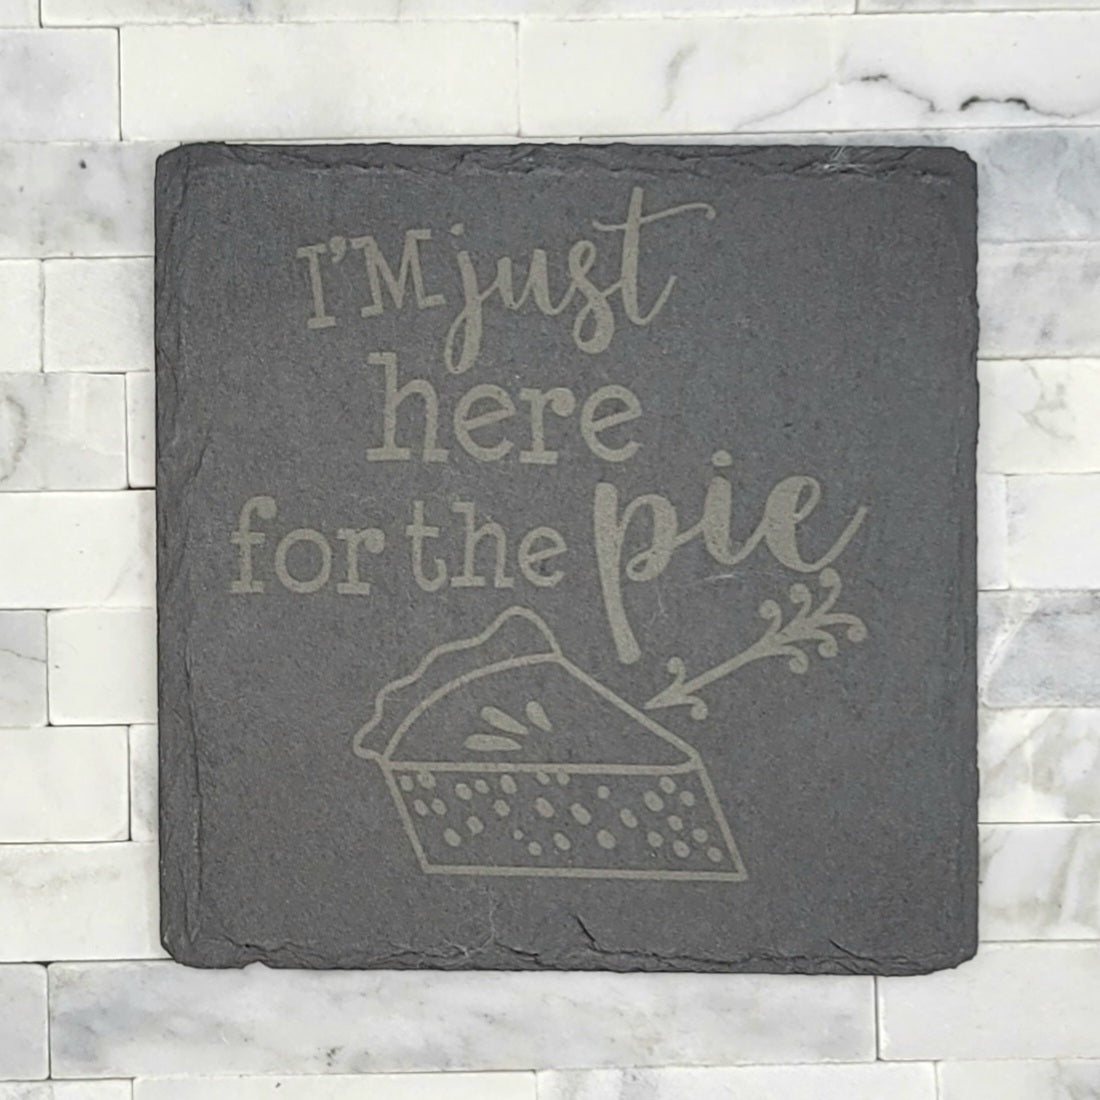 Slate Thanksgiving-Themed Coasters